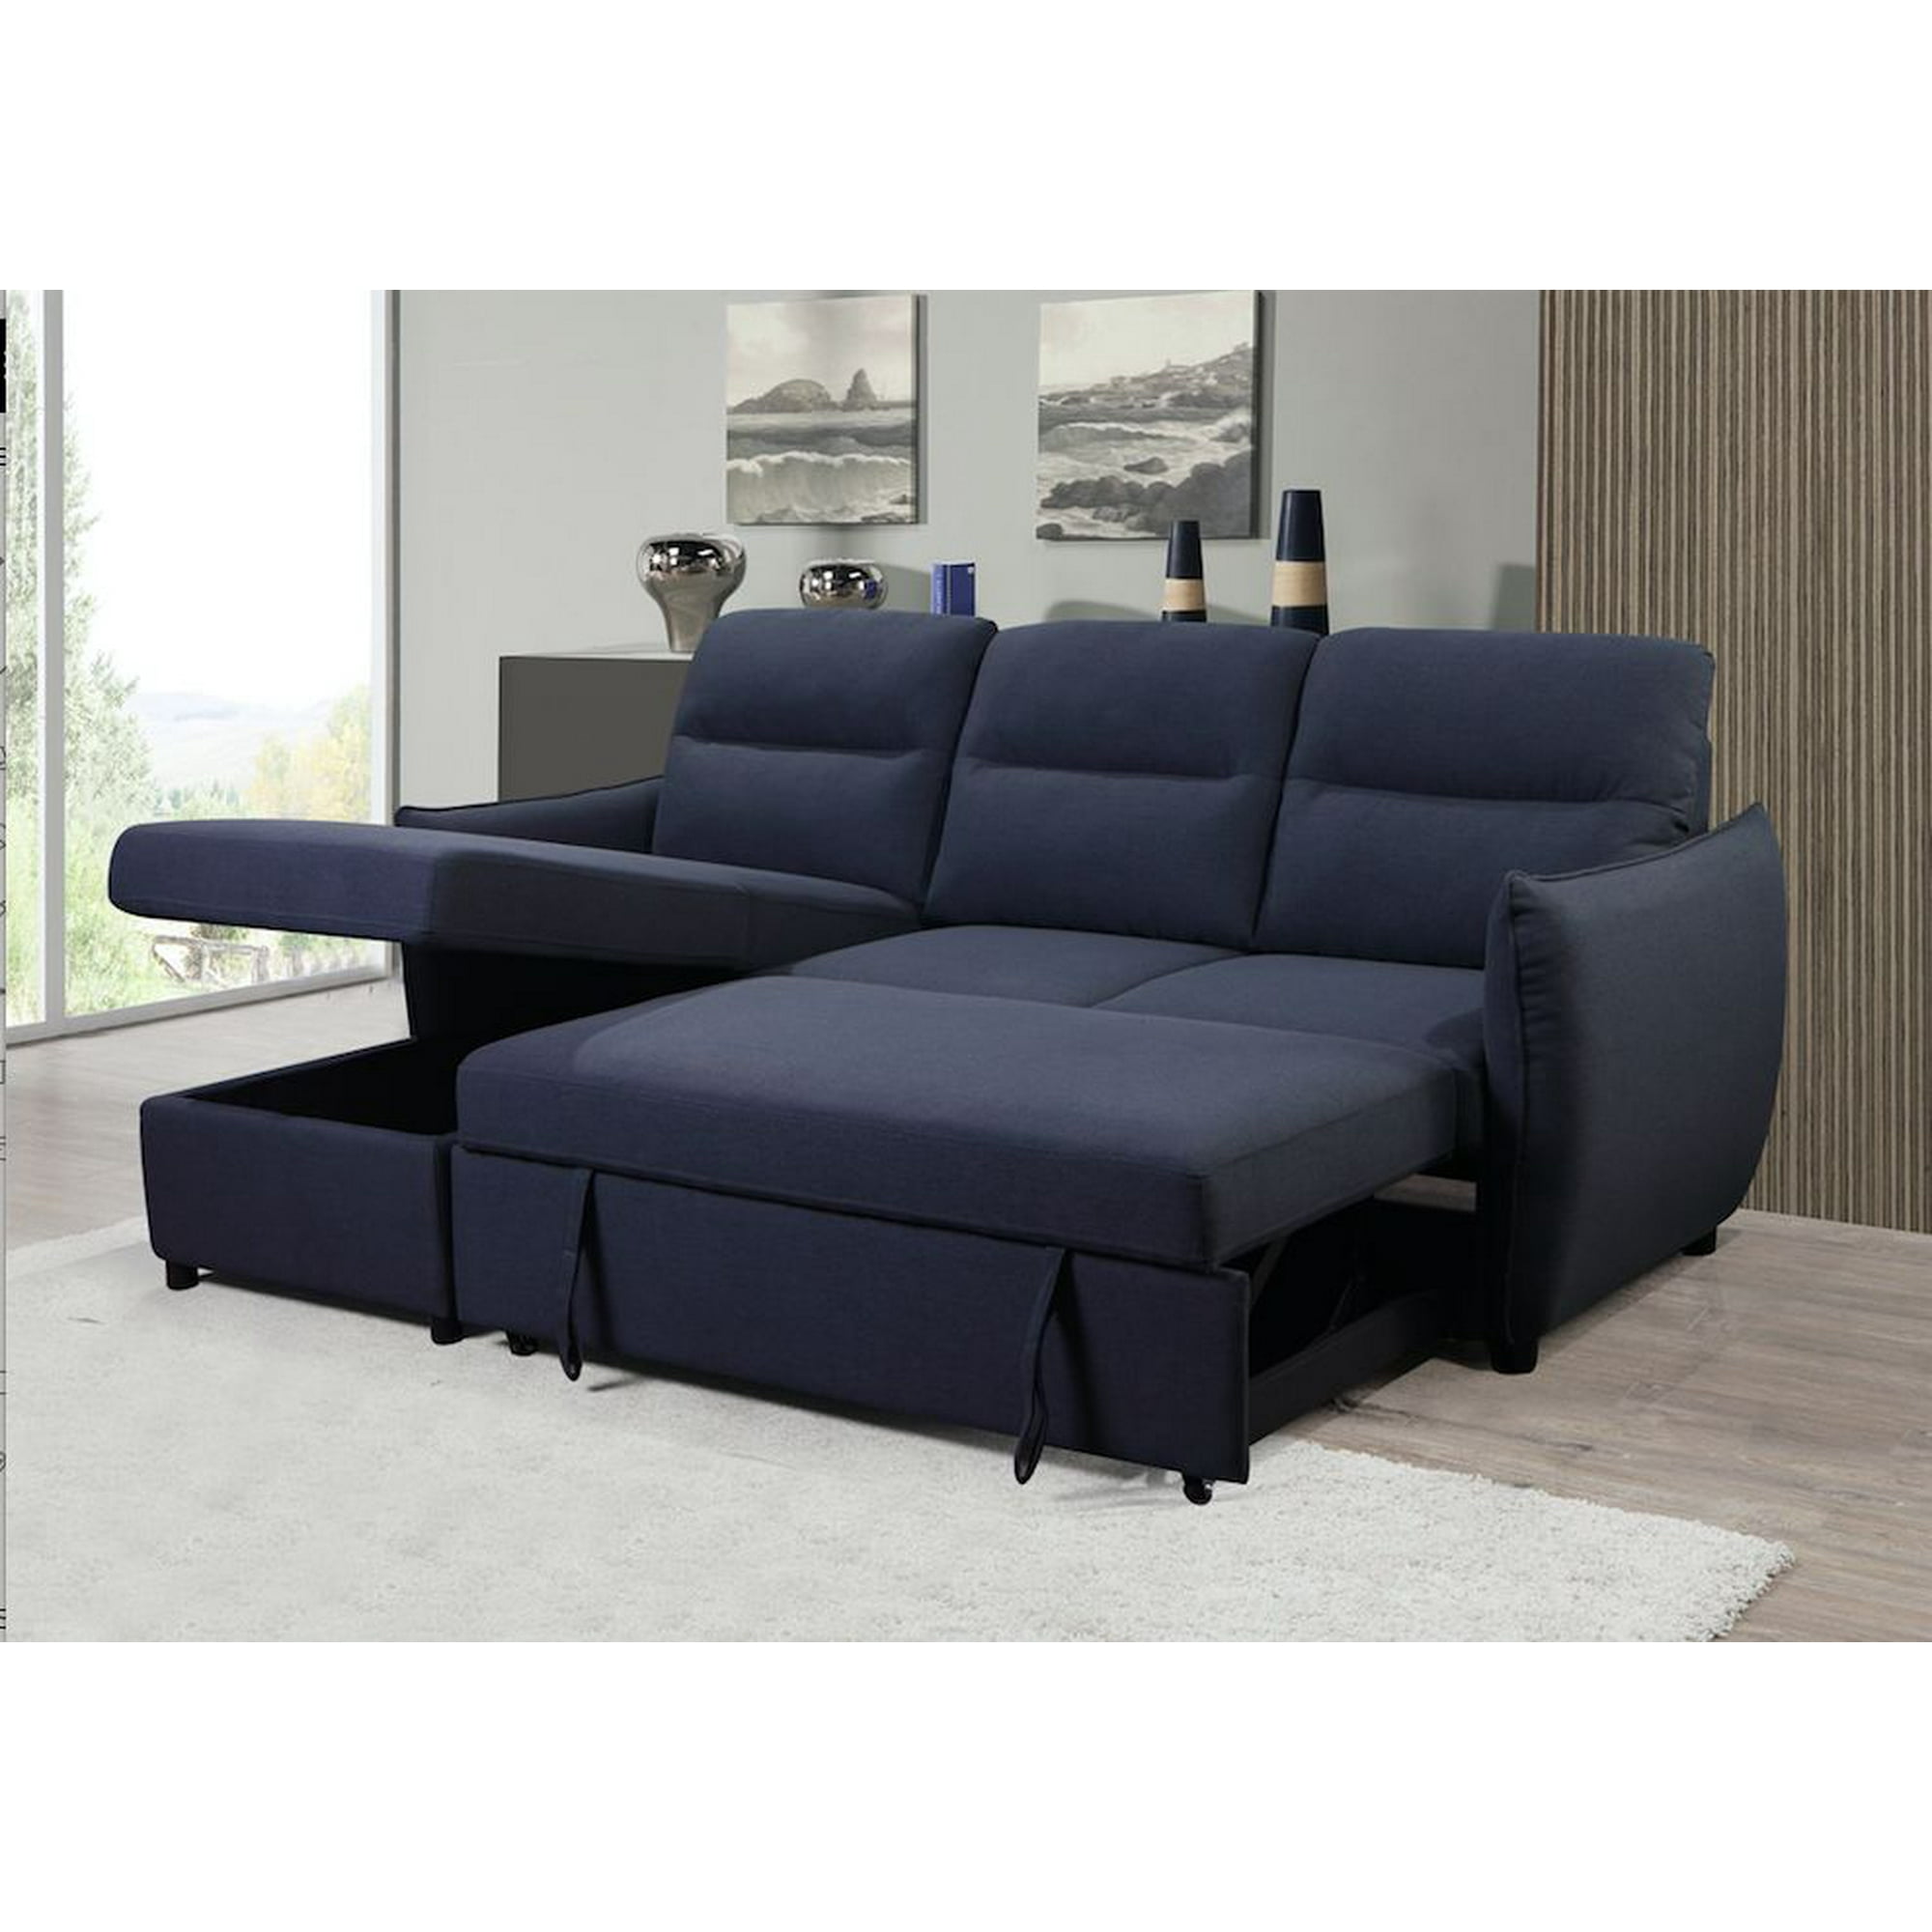 K-Living Liam Linen Fabric Sectional Sofa Bed in Navy 